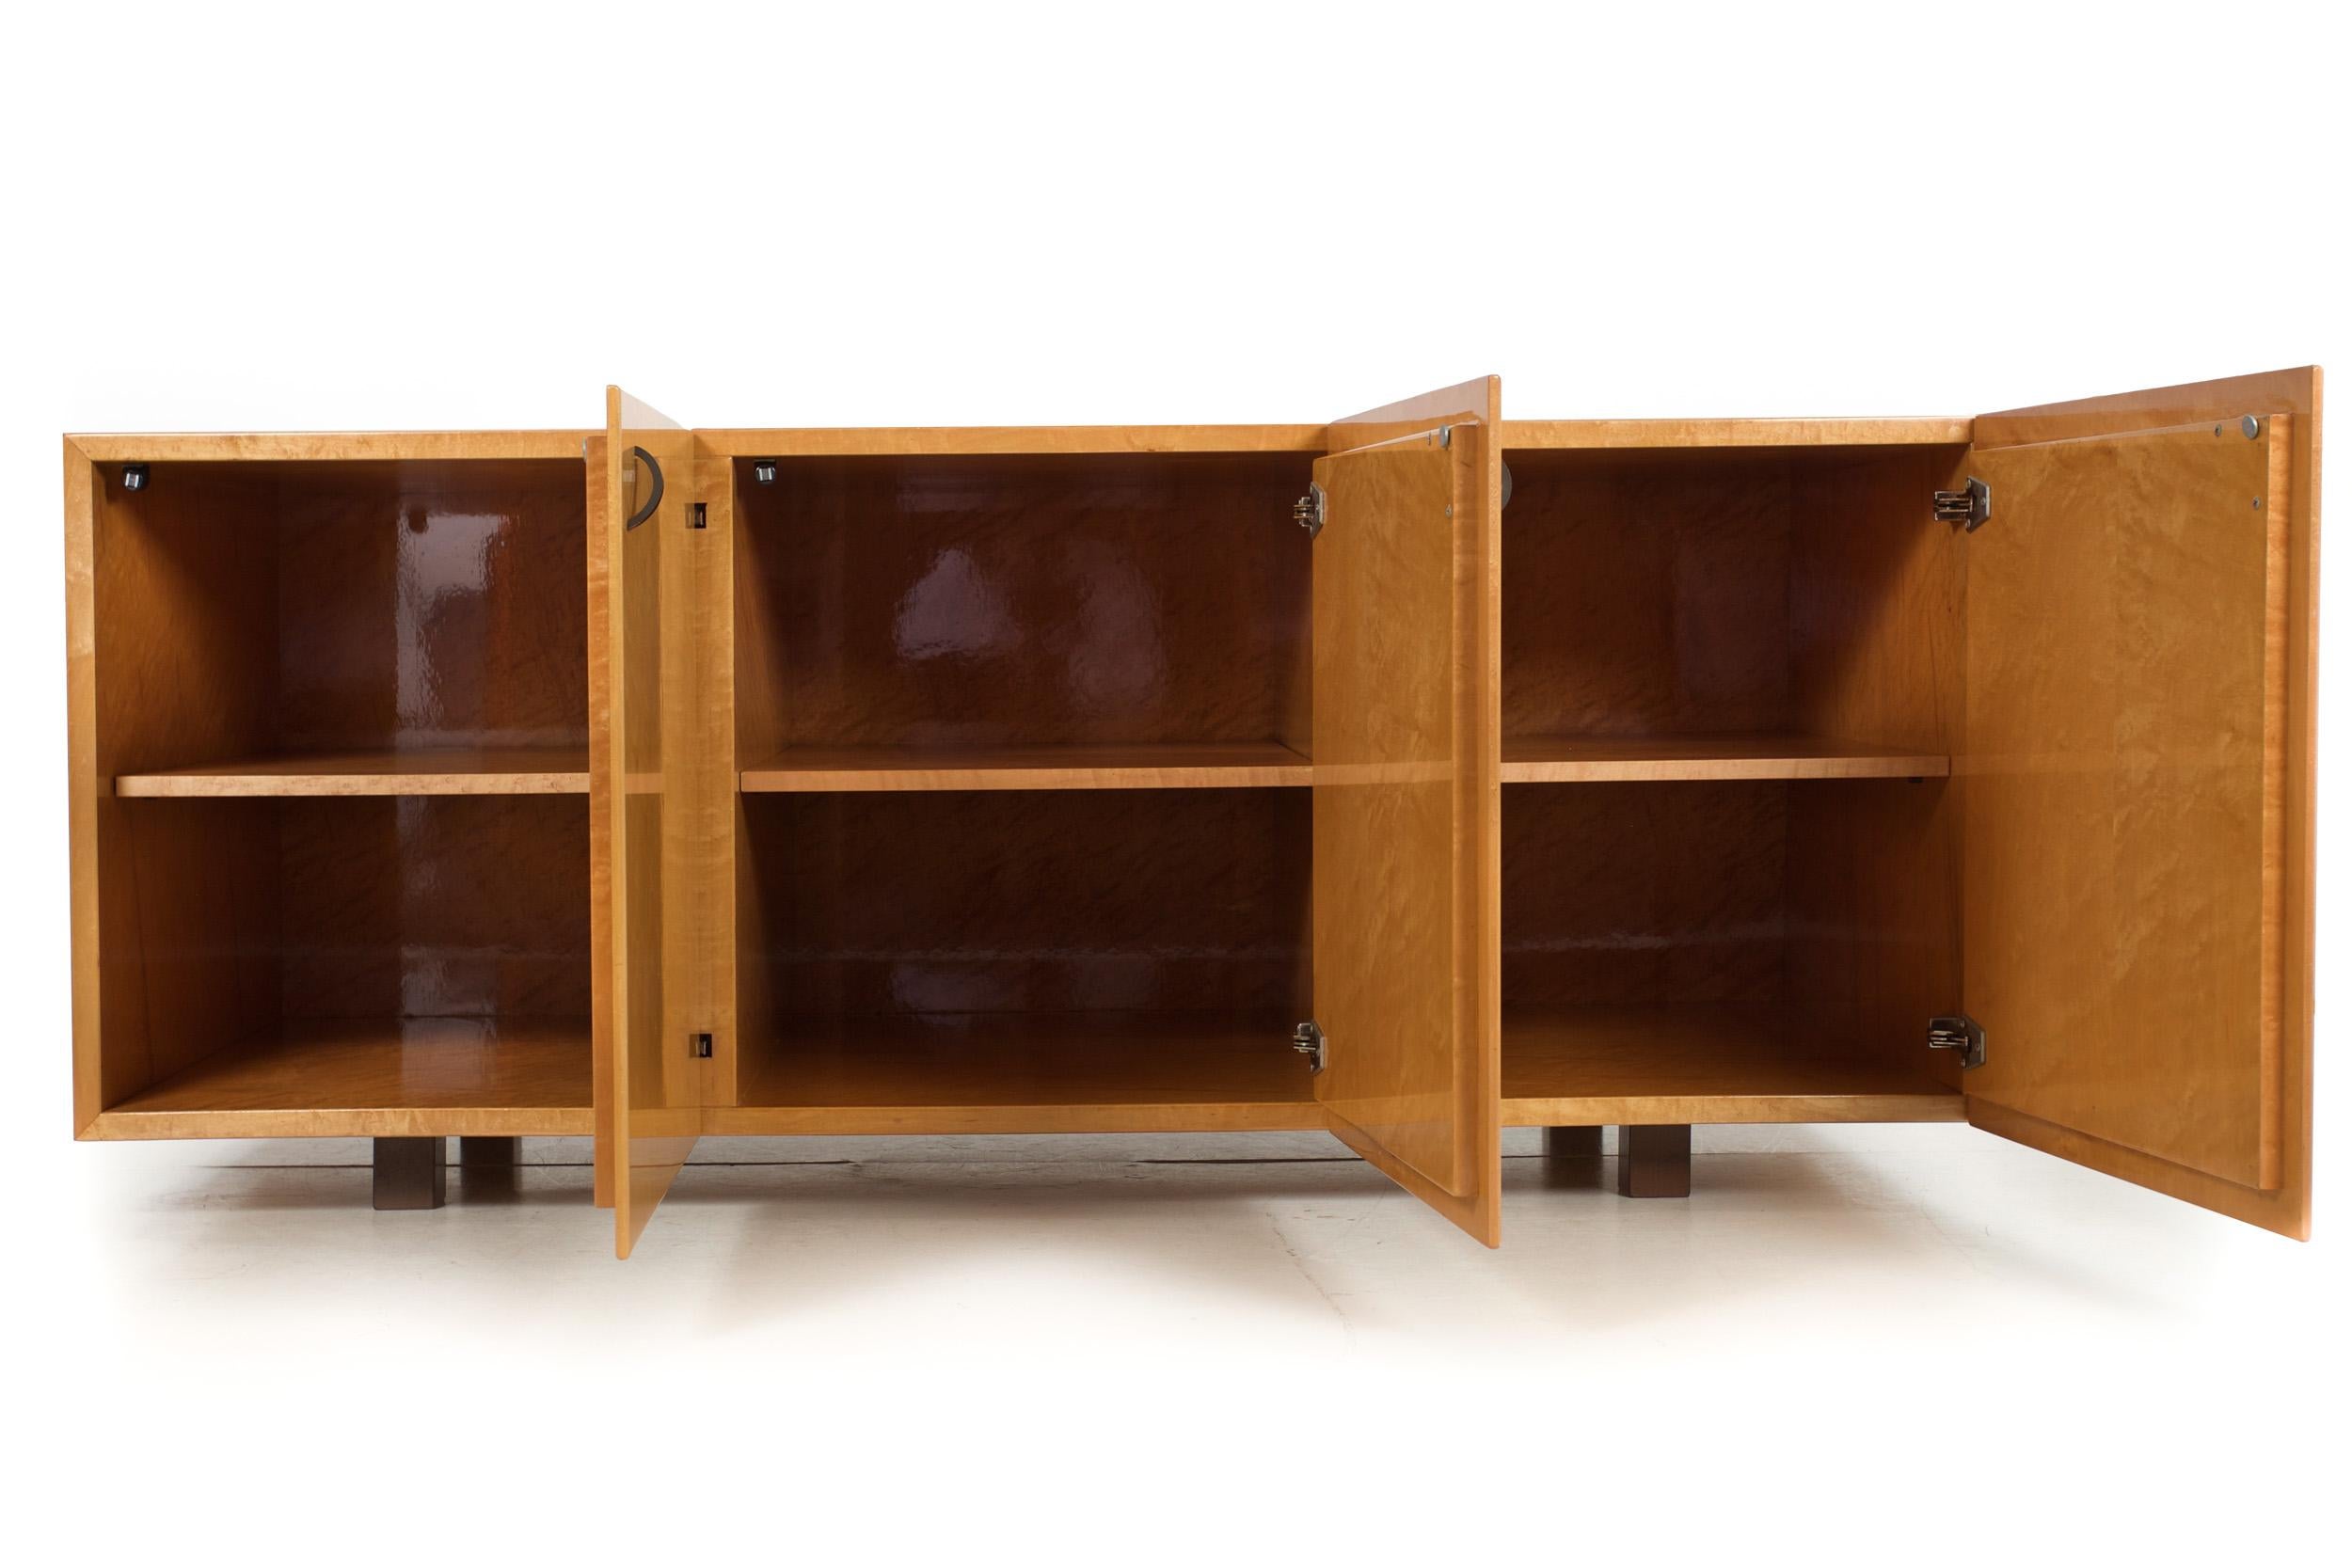 A delightful three-door credenza designed by Giovanni Offredi for Saporiti entirely in birdseye-maple veneered surfaces, it is a brilliant piece that absolutely glows under the shimmering acrylic varnish surface throughout. The doors are set with